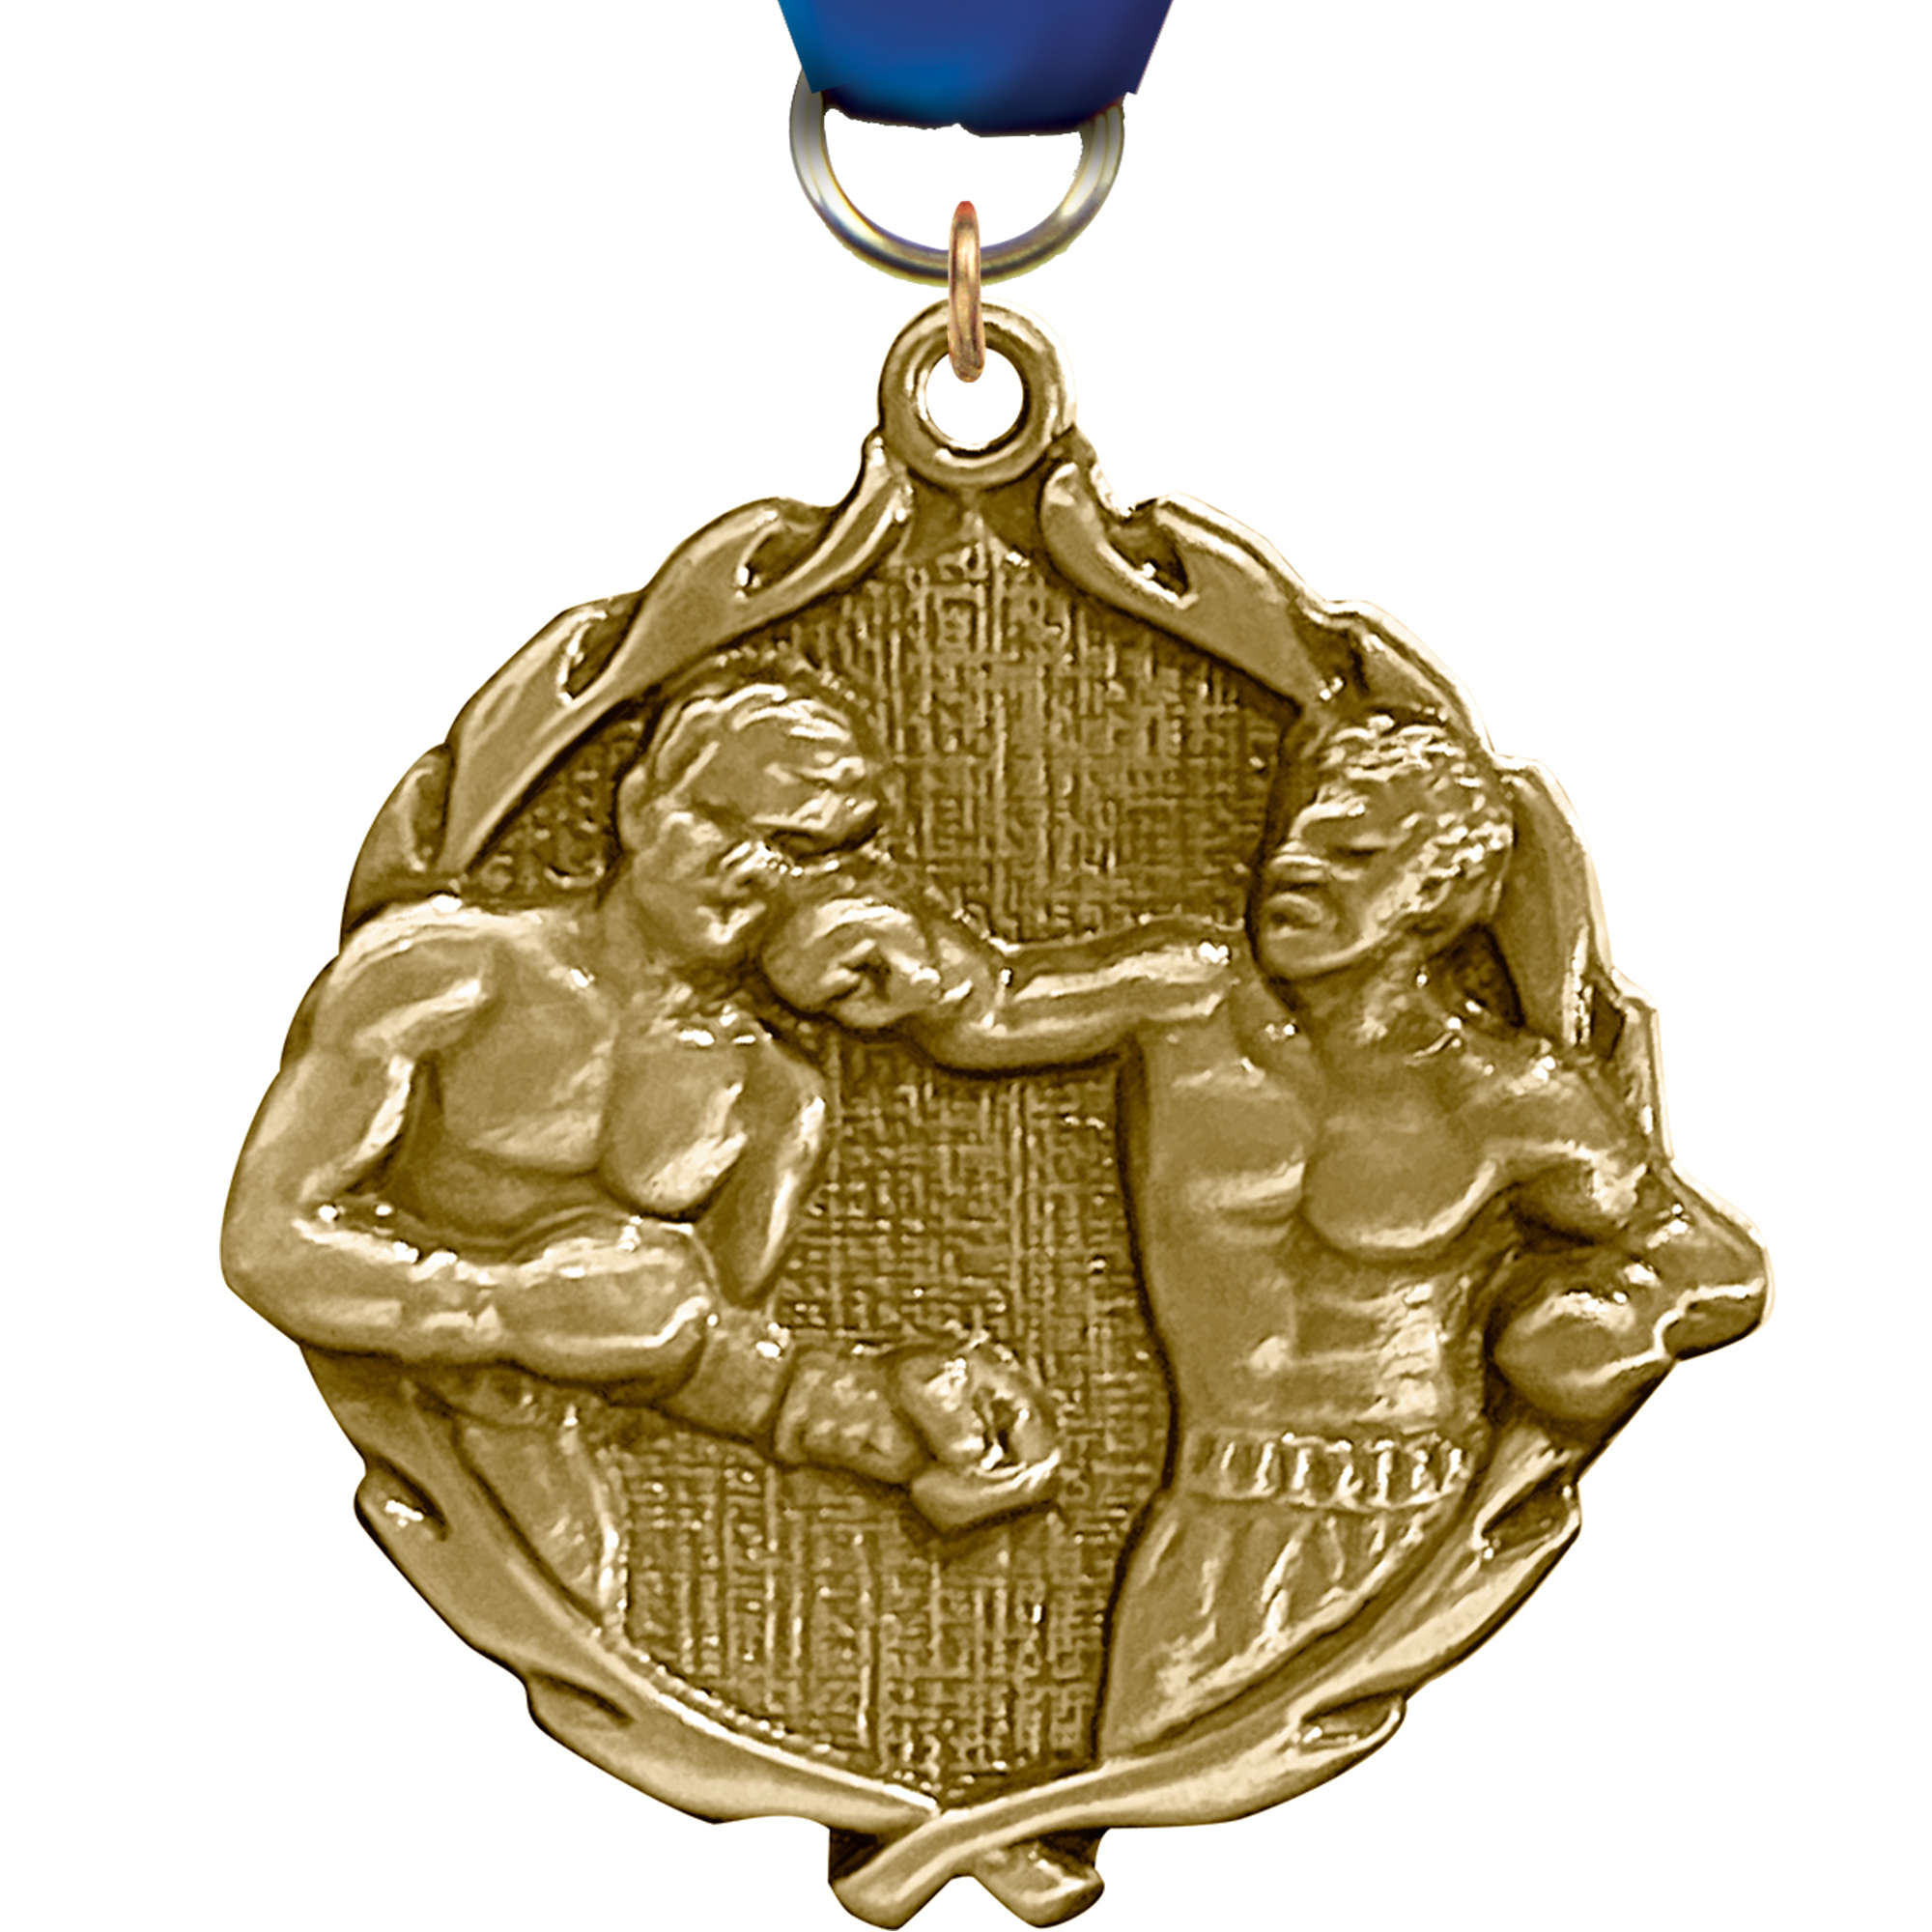 1.75 inch Boxing Wreath Medal